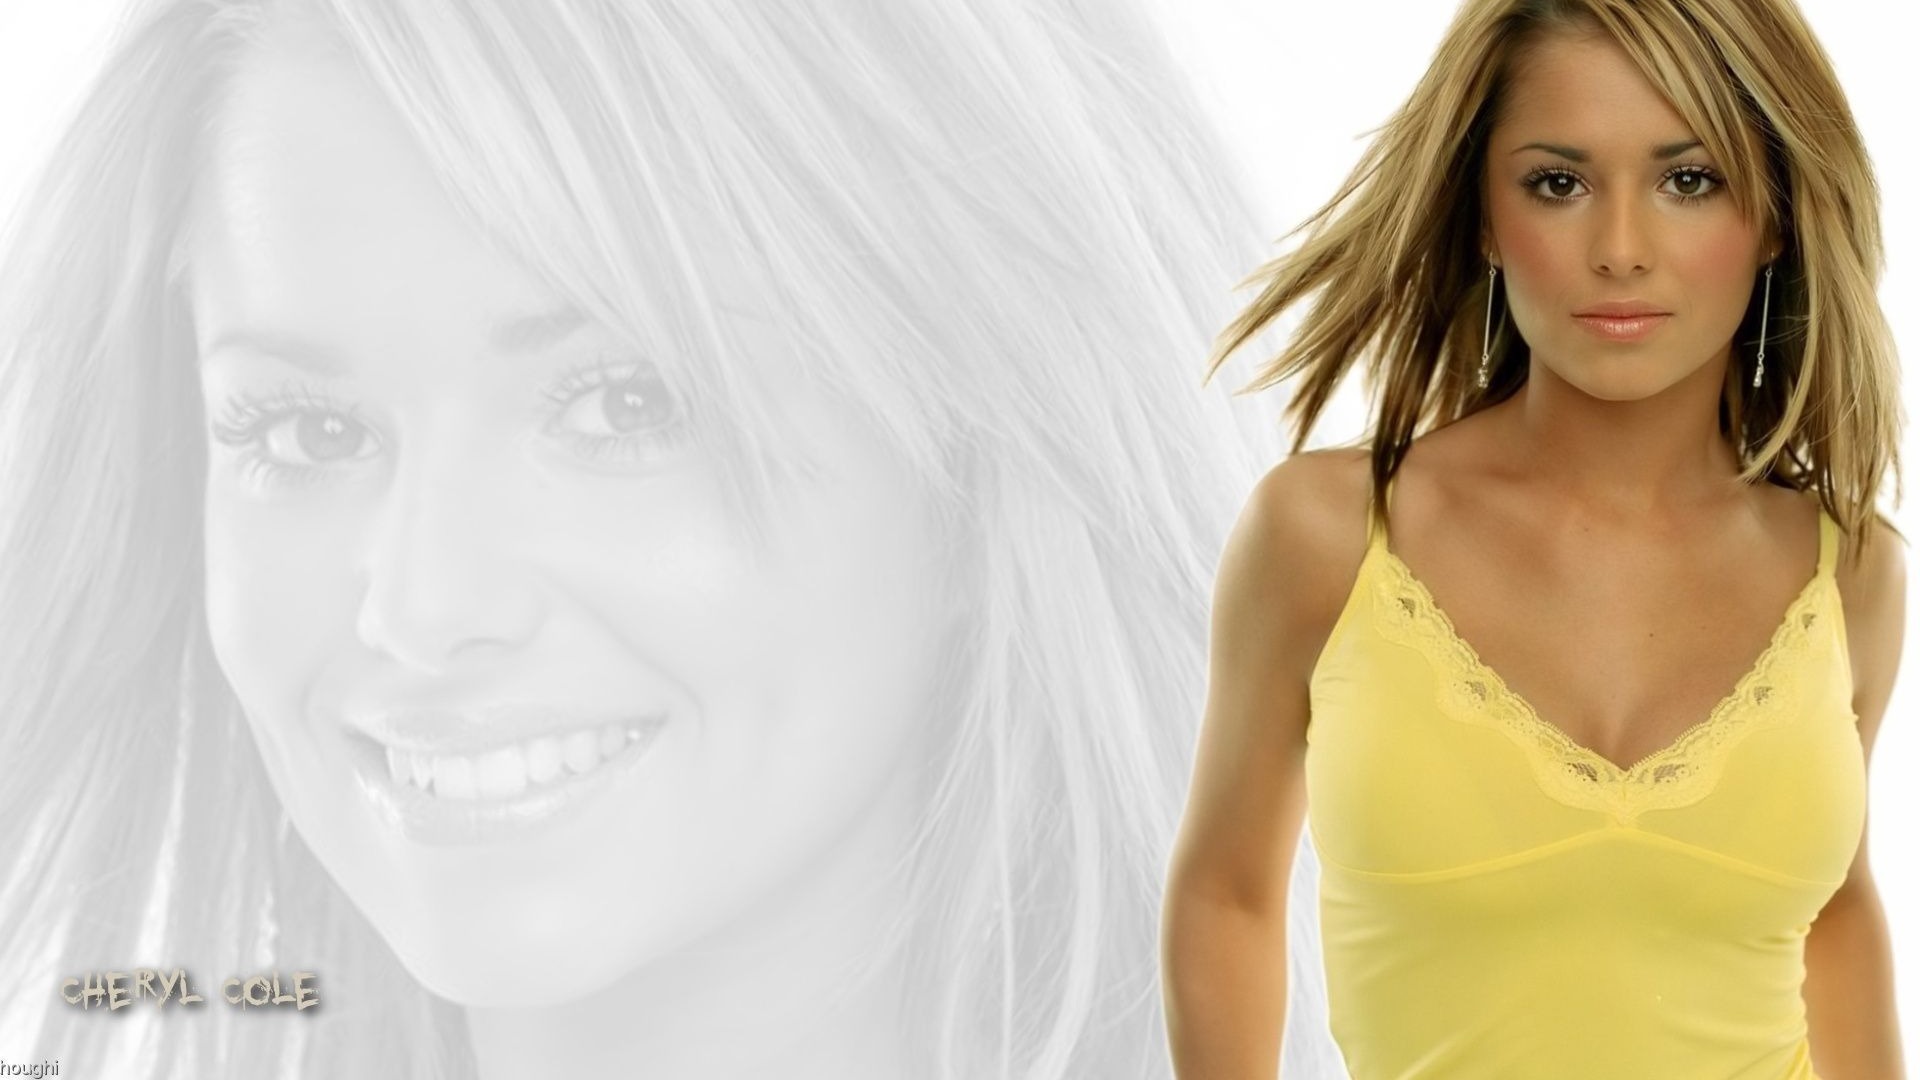 Cheryl Cole #013 - 1920x1080 Wallpapers Pictures Photos Images